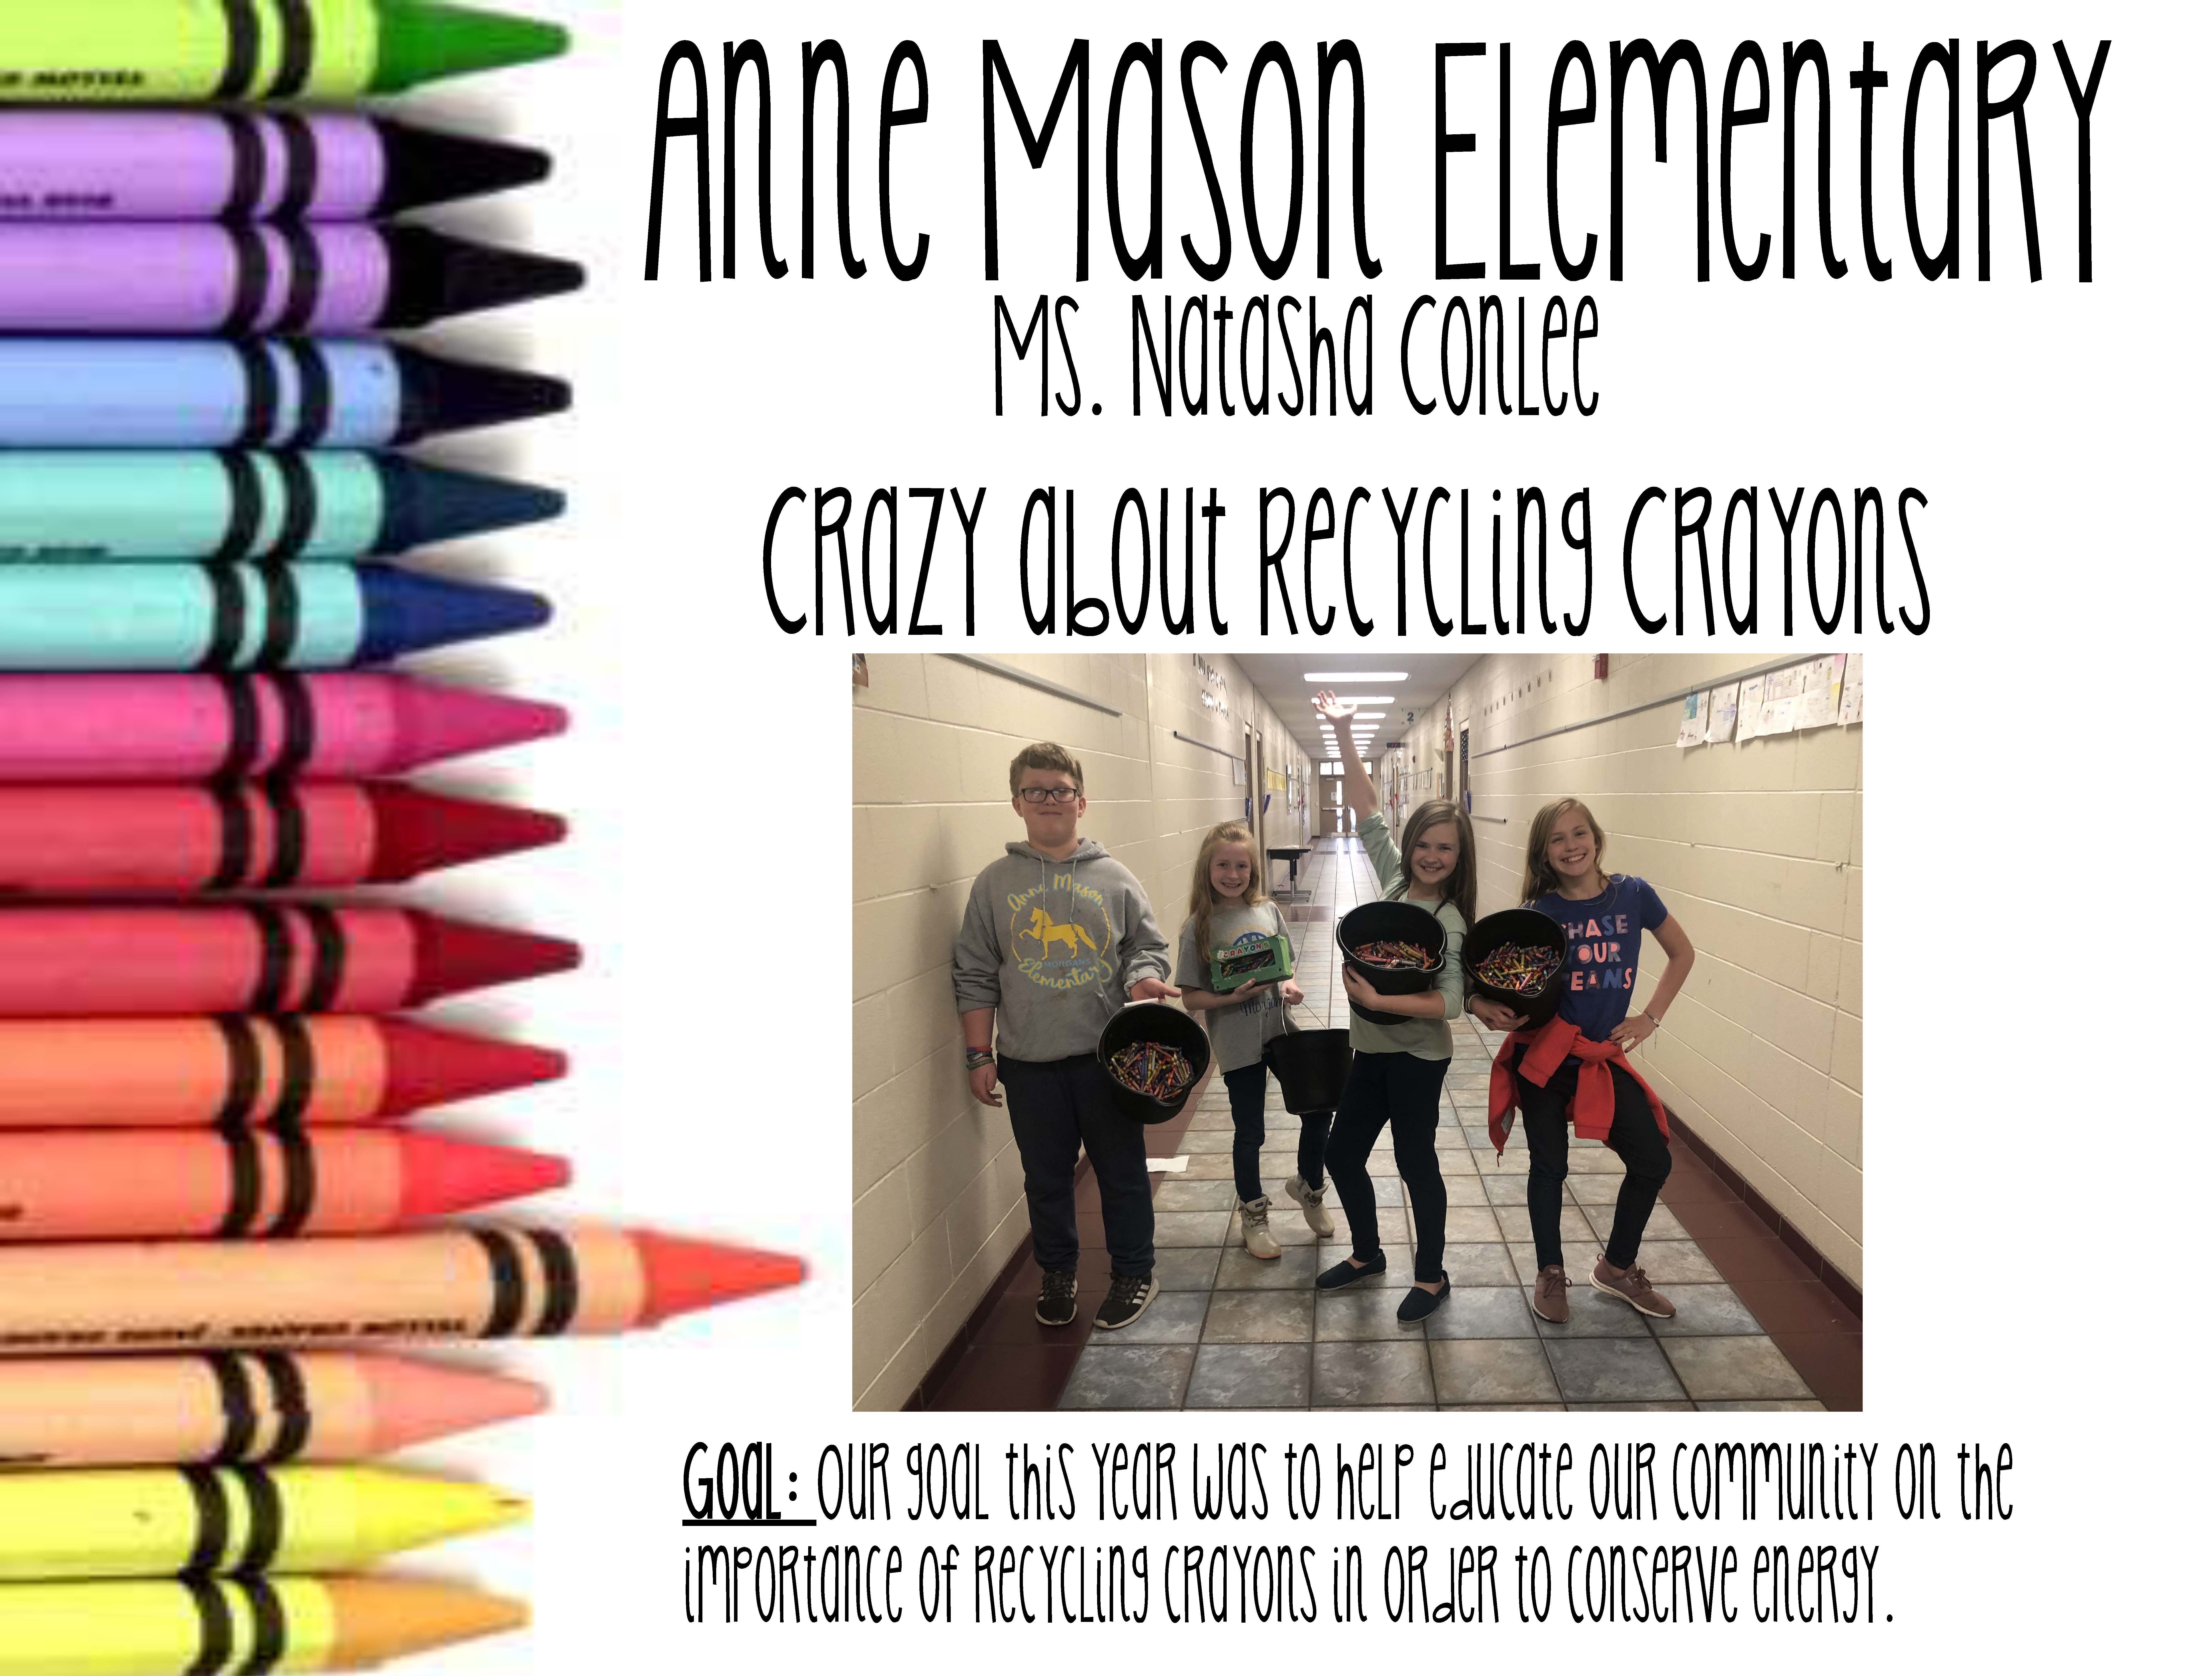 Crazy about Crayons